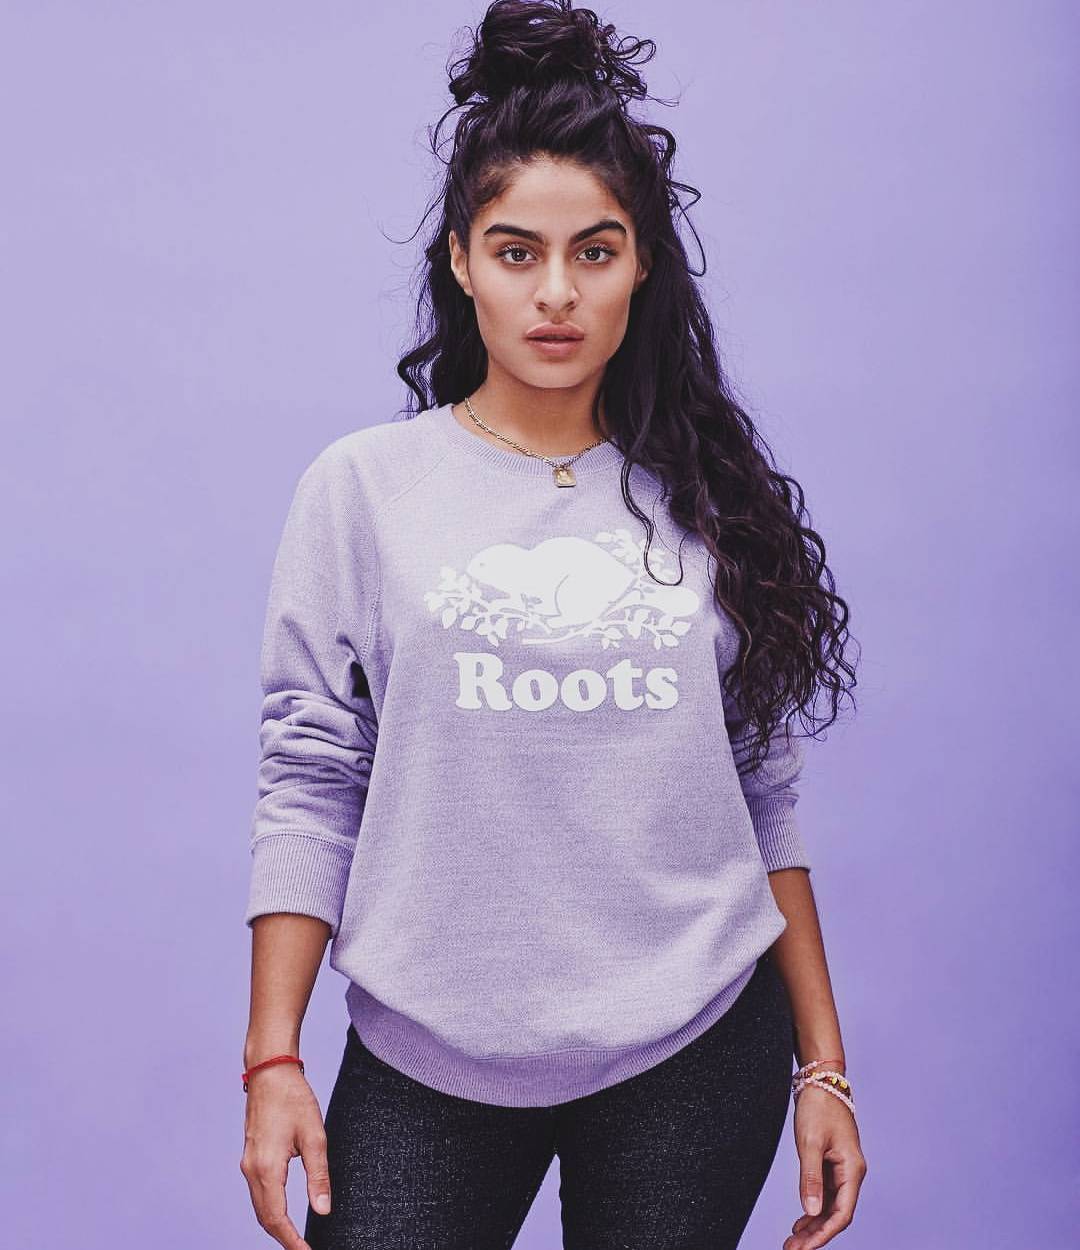 51 Hot Pictures Of Jessie Reyez Will Leave You Flabbergasted By Her Hot Magnificence 549